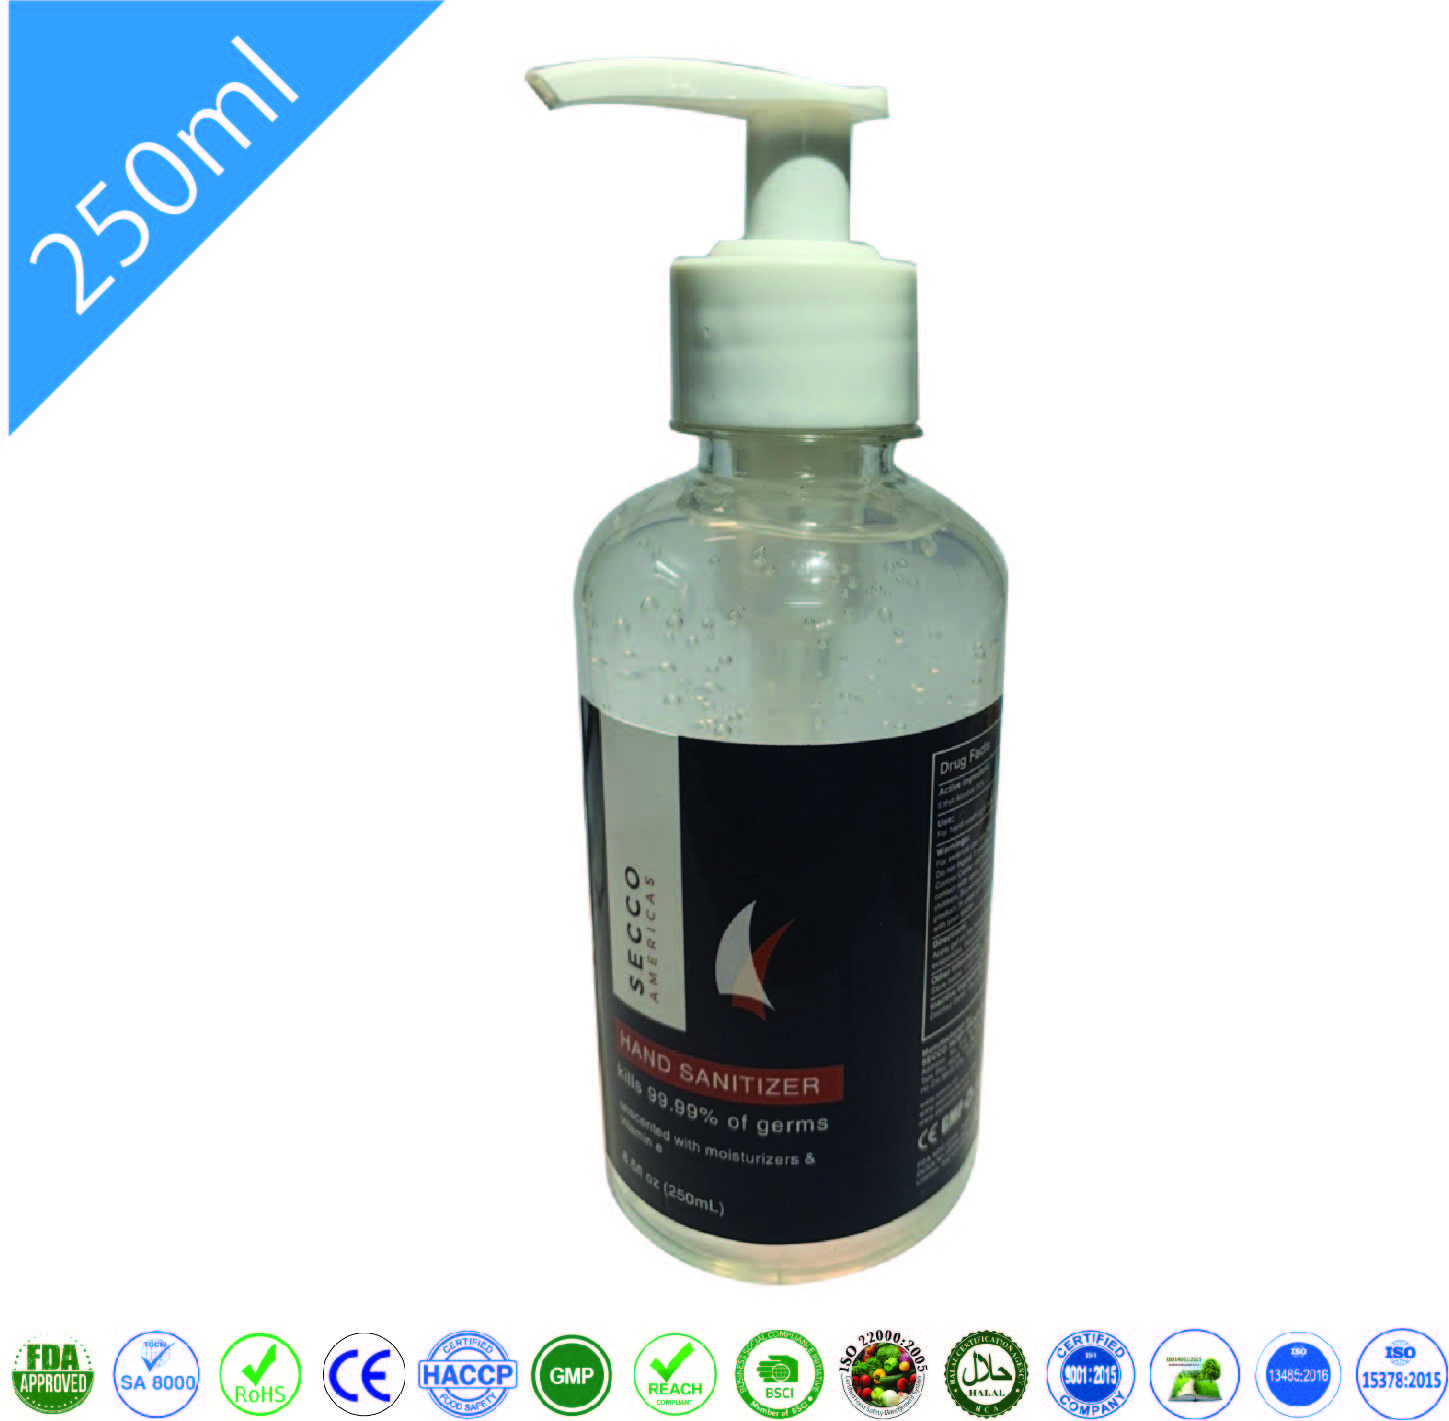 Secco hand sanitizer 250ml with pump